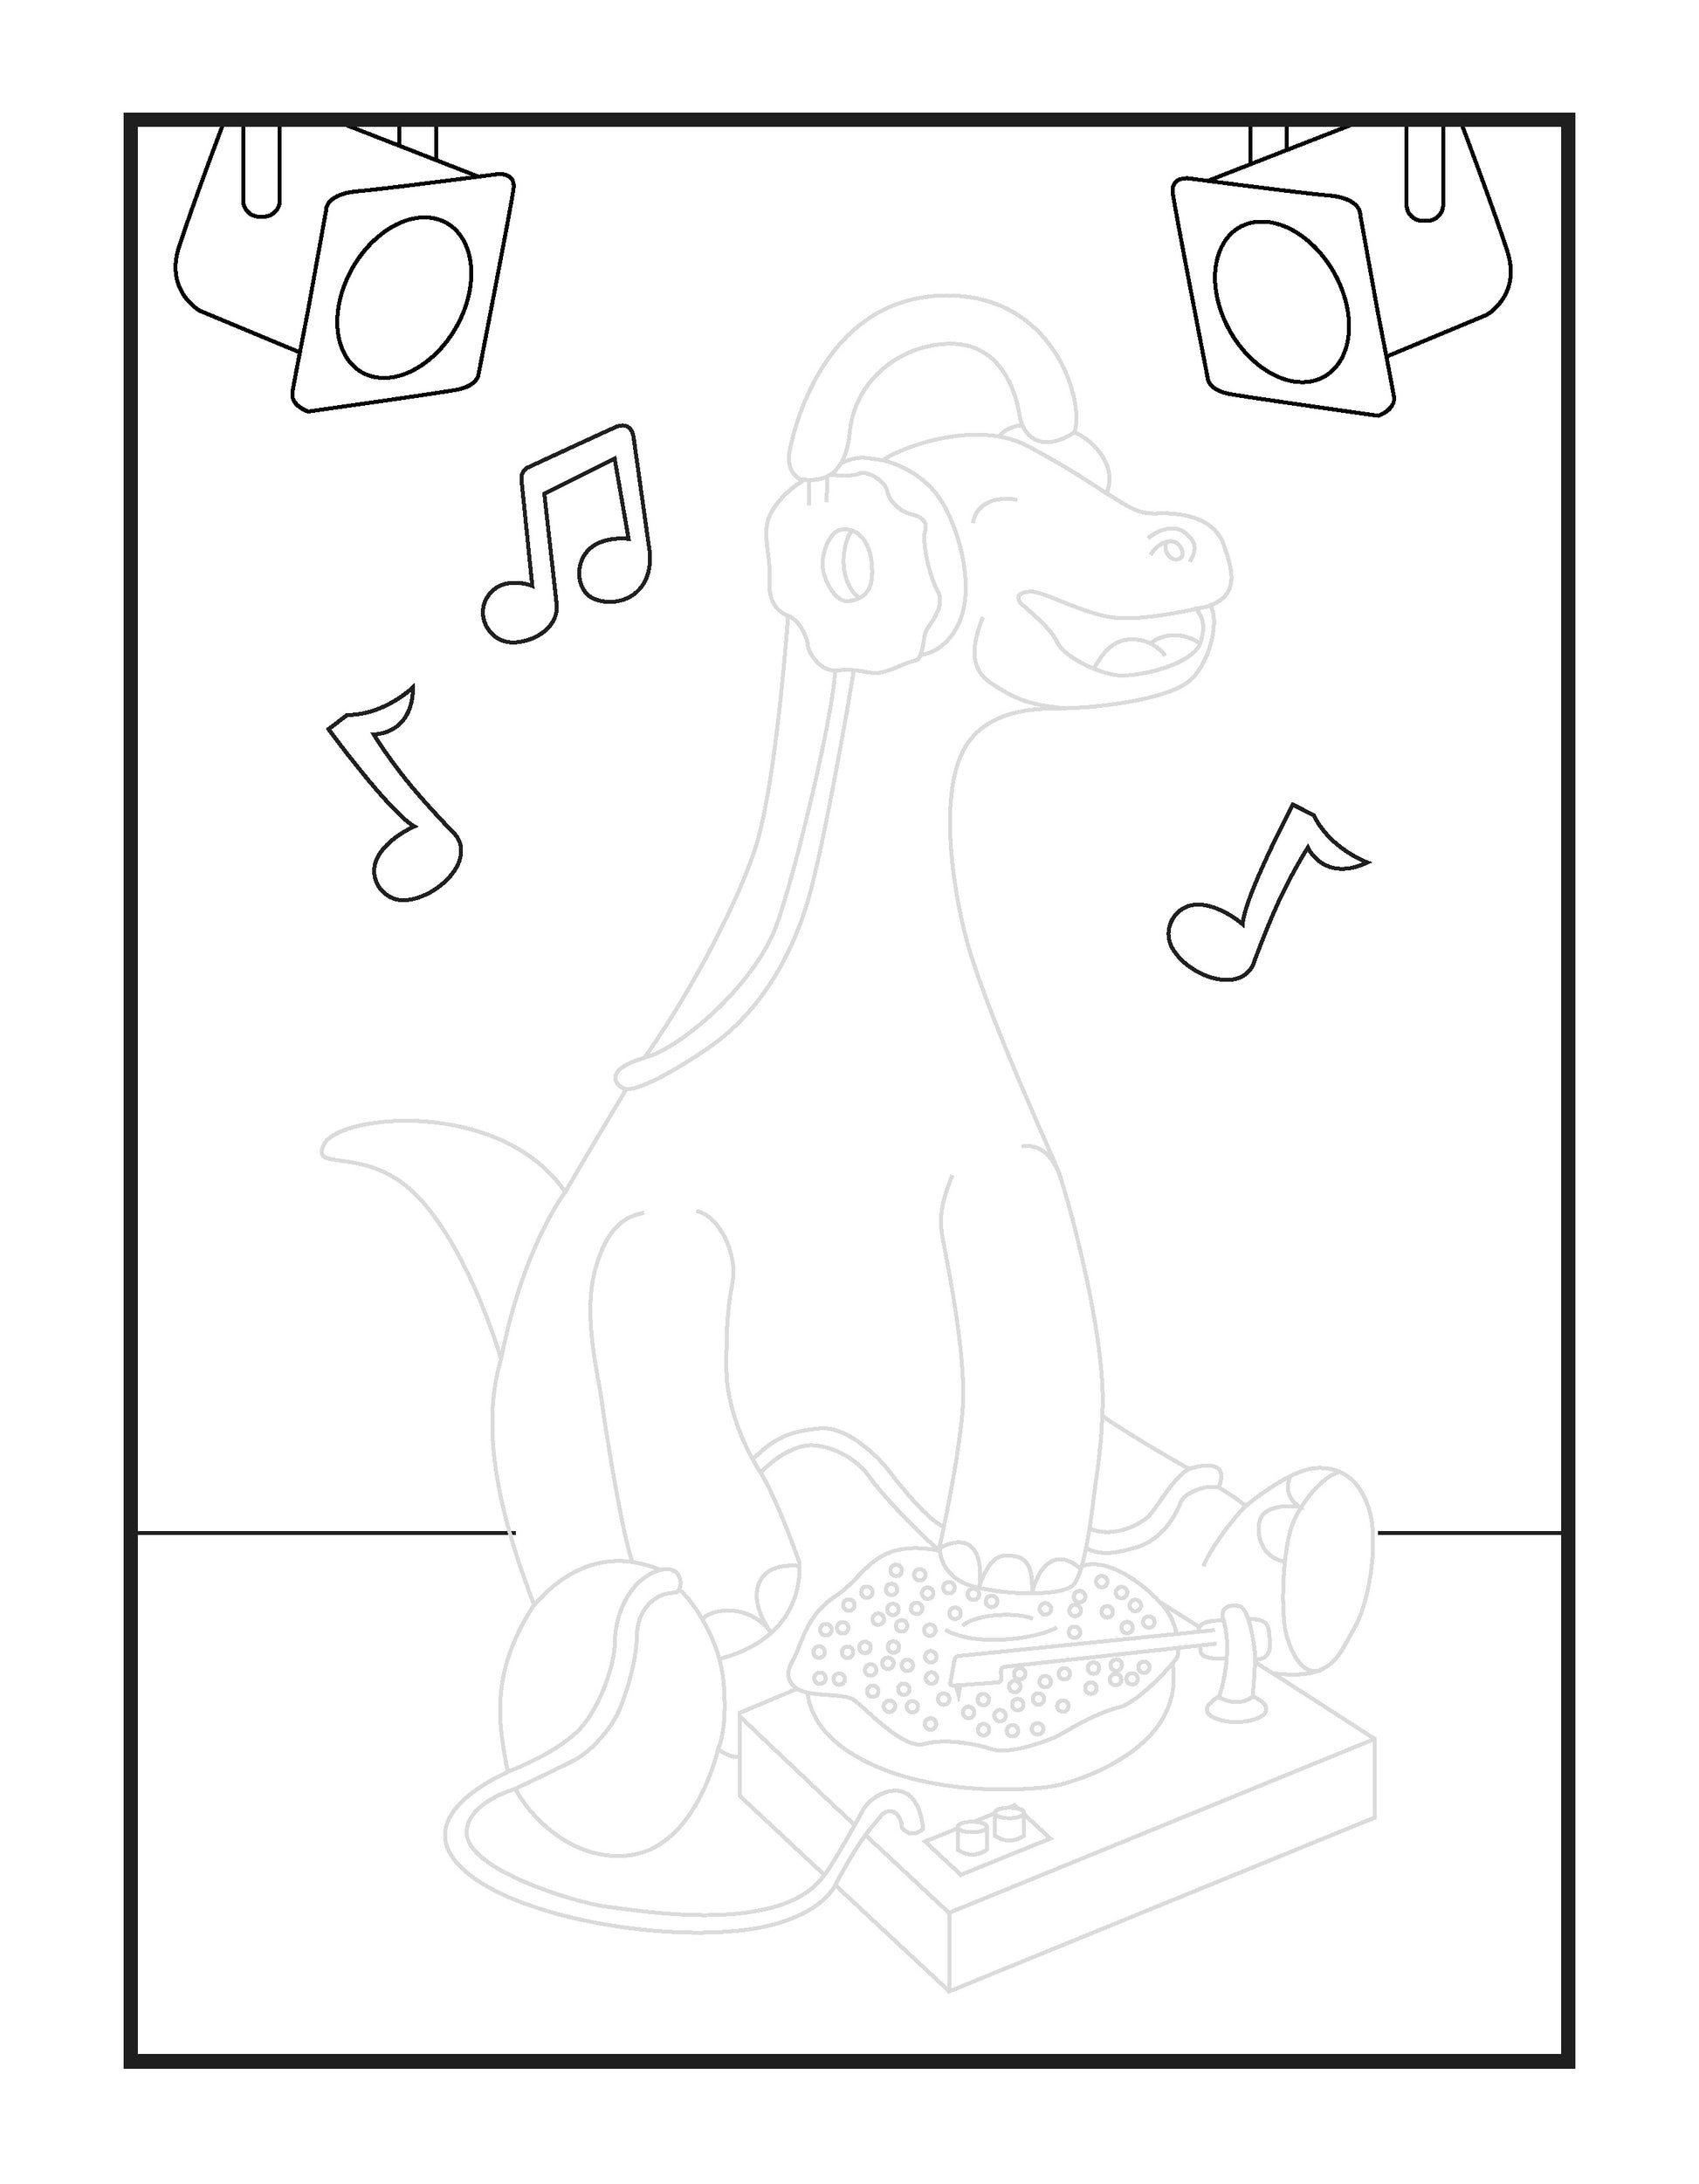 A joyful coloring page depicts a dinosaur DJ having a blast with music. The dinosaur is wearing headphones and sitting with eyes closed, a big smile, feeling the beat. In front of the dinosaur, there's a turntable setup ready to spin tracks. Musical notes float in the air, symbolizing the rhythm and melody flowing through the scene. Overhead, stage lights add to the ambiance, suggesting a dance floor vibe. This drawing is perfect for inspiring musical interest and artistic coloring in kids.